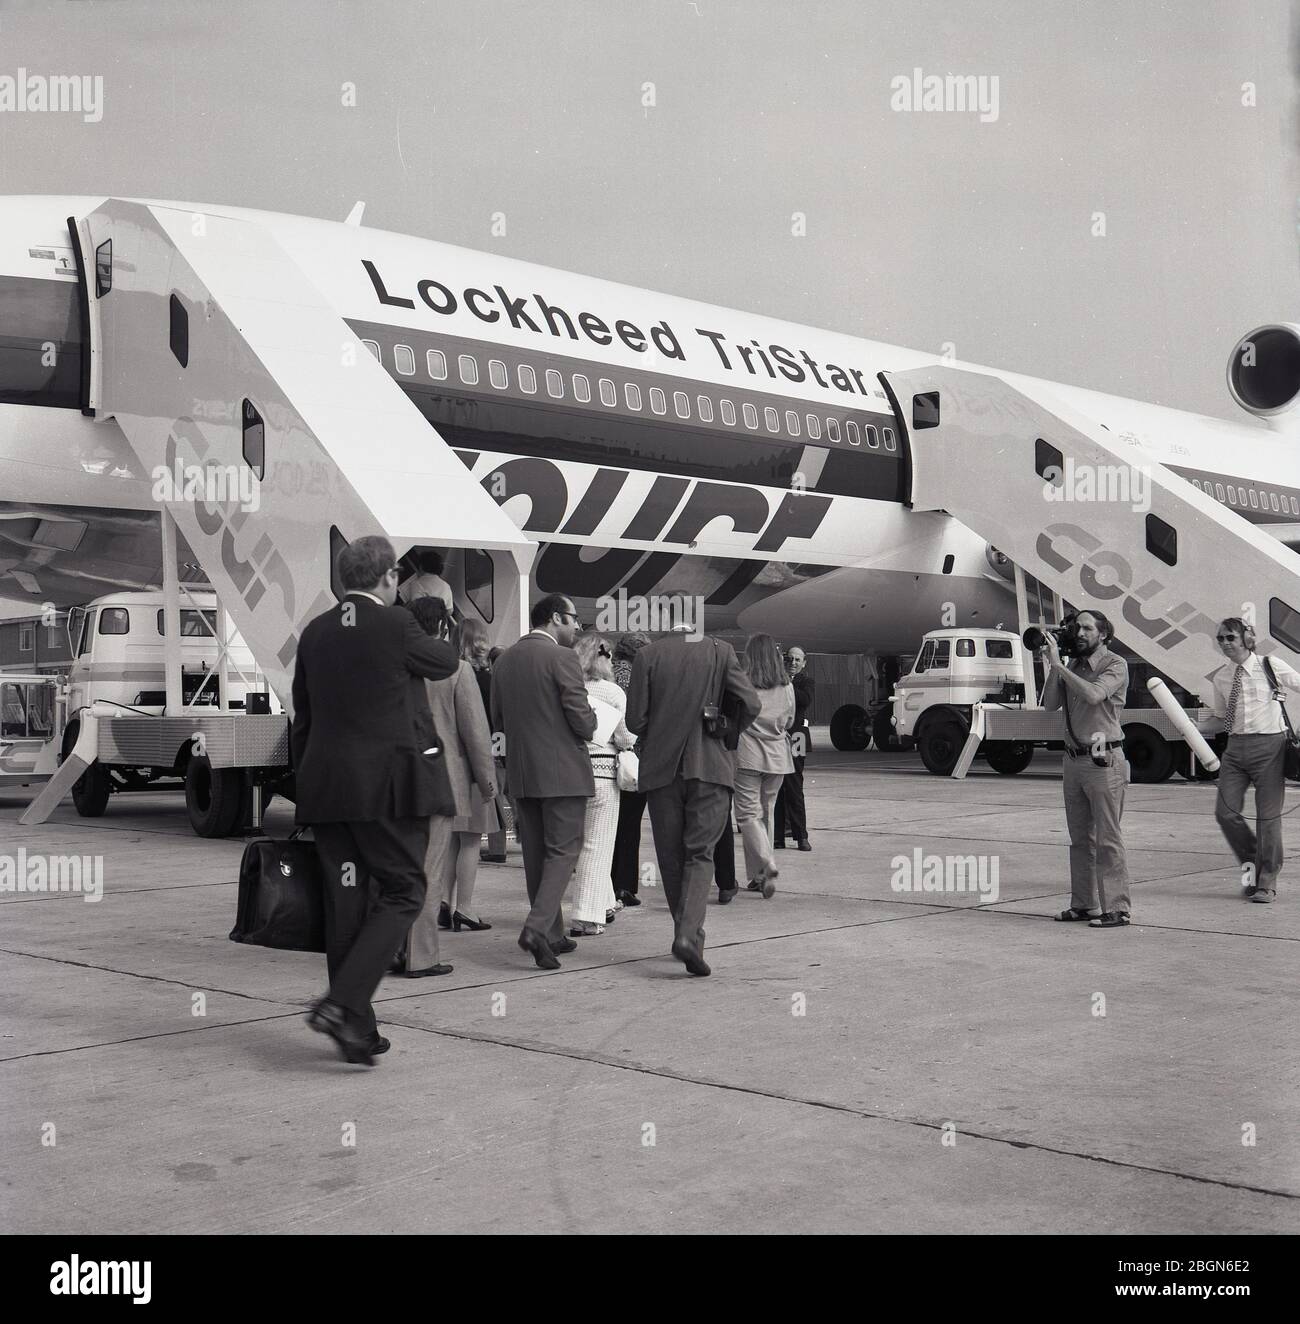 1973, historical, television cameras filming passengers boarding a Lockheed Tristar airplance (L-1011), at the time, the most technologically-advanced widebody commercial aircraft in the world. Court Line Aviation, a British holiday charter company, was the first European airline to operate the Lockheed widebody, powered by the Rolls-Royce RB211 engine, a three-spool engine capable of generating powerful thrust. Stock Photo